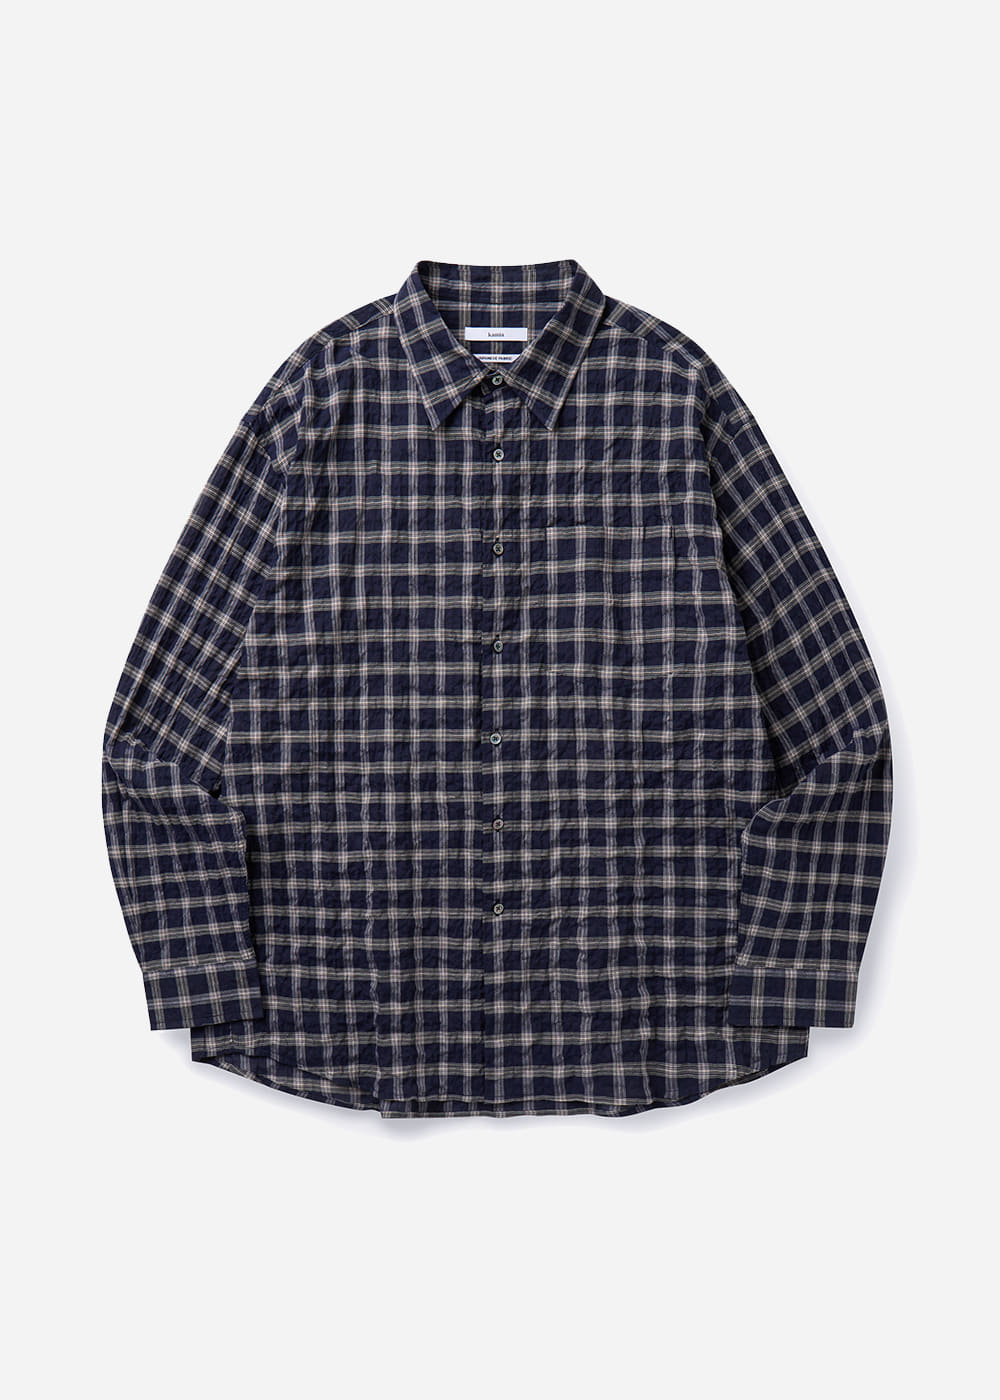 [PRE-ORDER] JAPANESE CRINKLE CHECK EDITOR SHIRTS [NAVY]